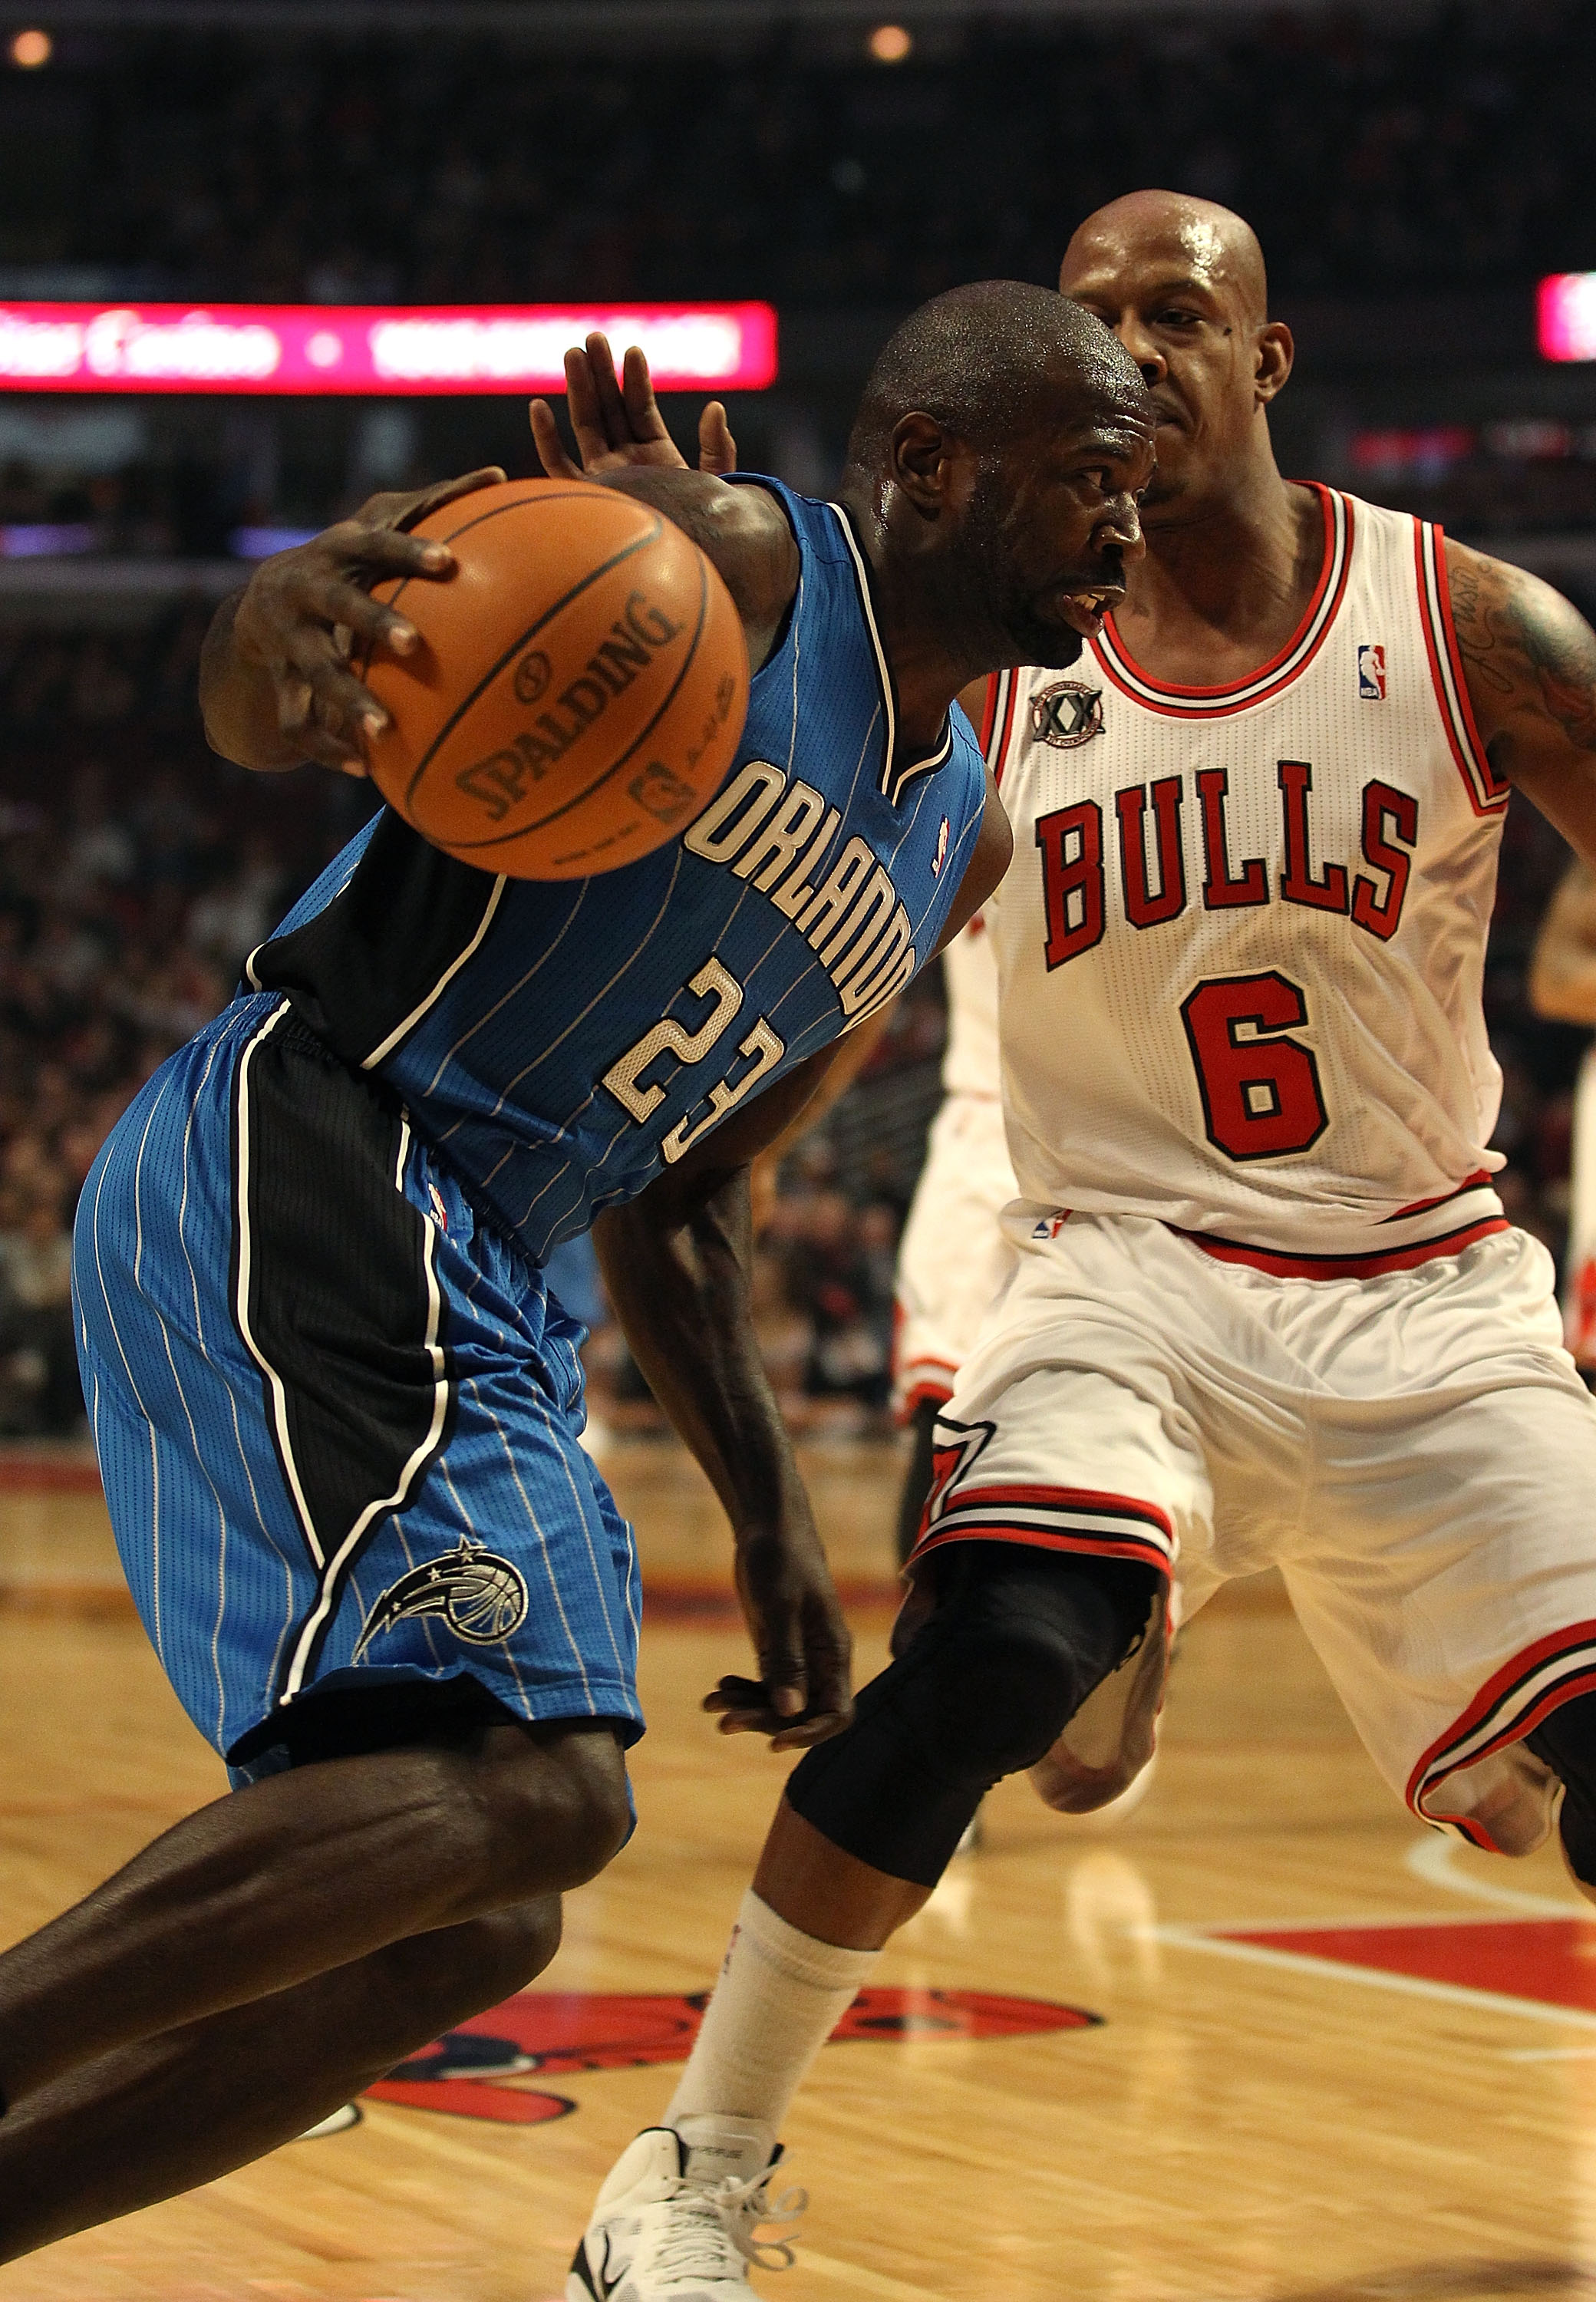 CHICAGO, IL - JANUARY 28: Jason Richardson #23 of the Orlando Magic moves against Keith Bogans #6 of the Chicago Bulls at the United Center on January 28, 2011 in Chicago, Illinois. The Bulls defeated the Magic 99-90. NOTE TO USER: User expressly acknowle